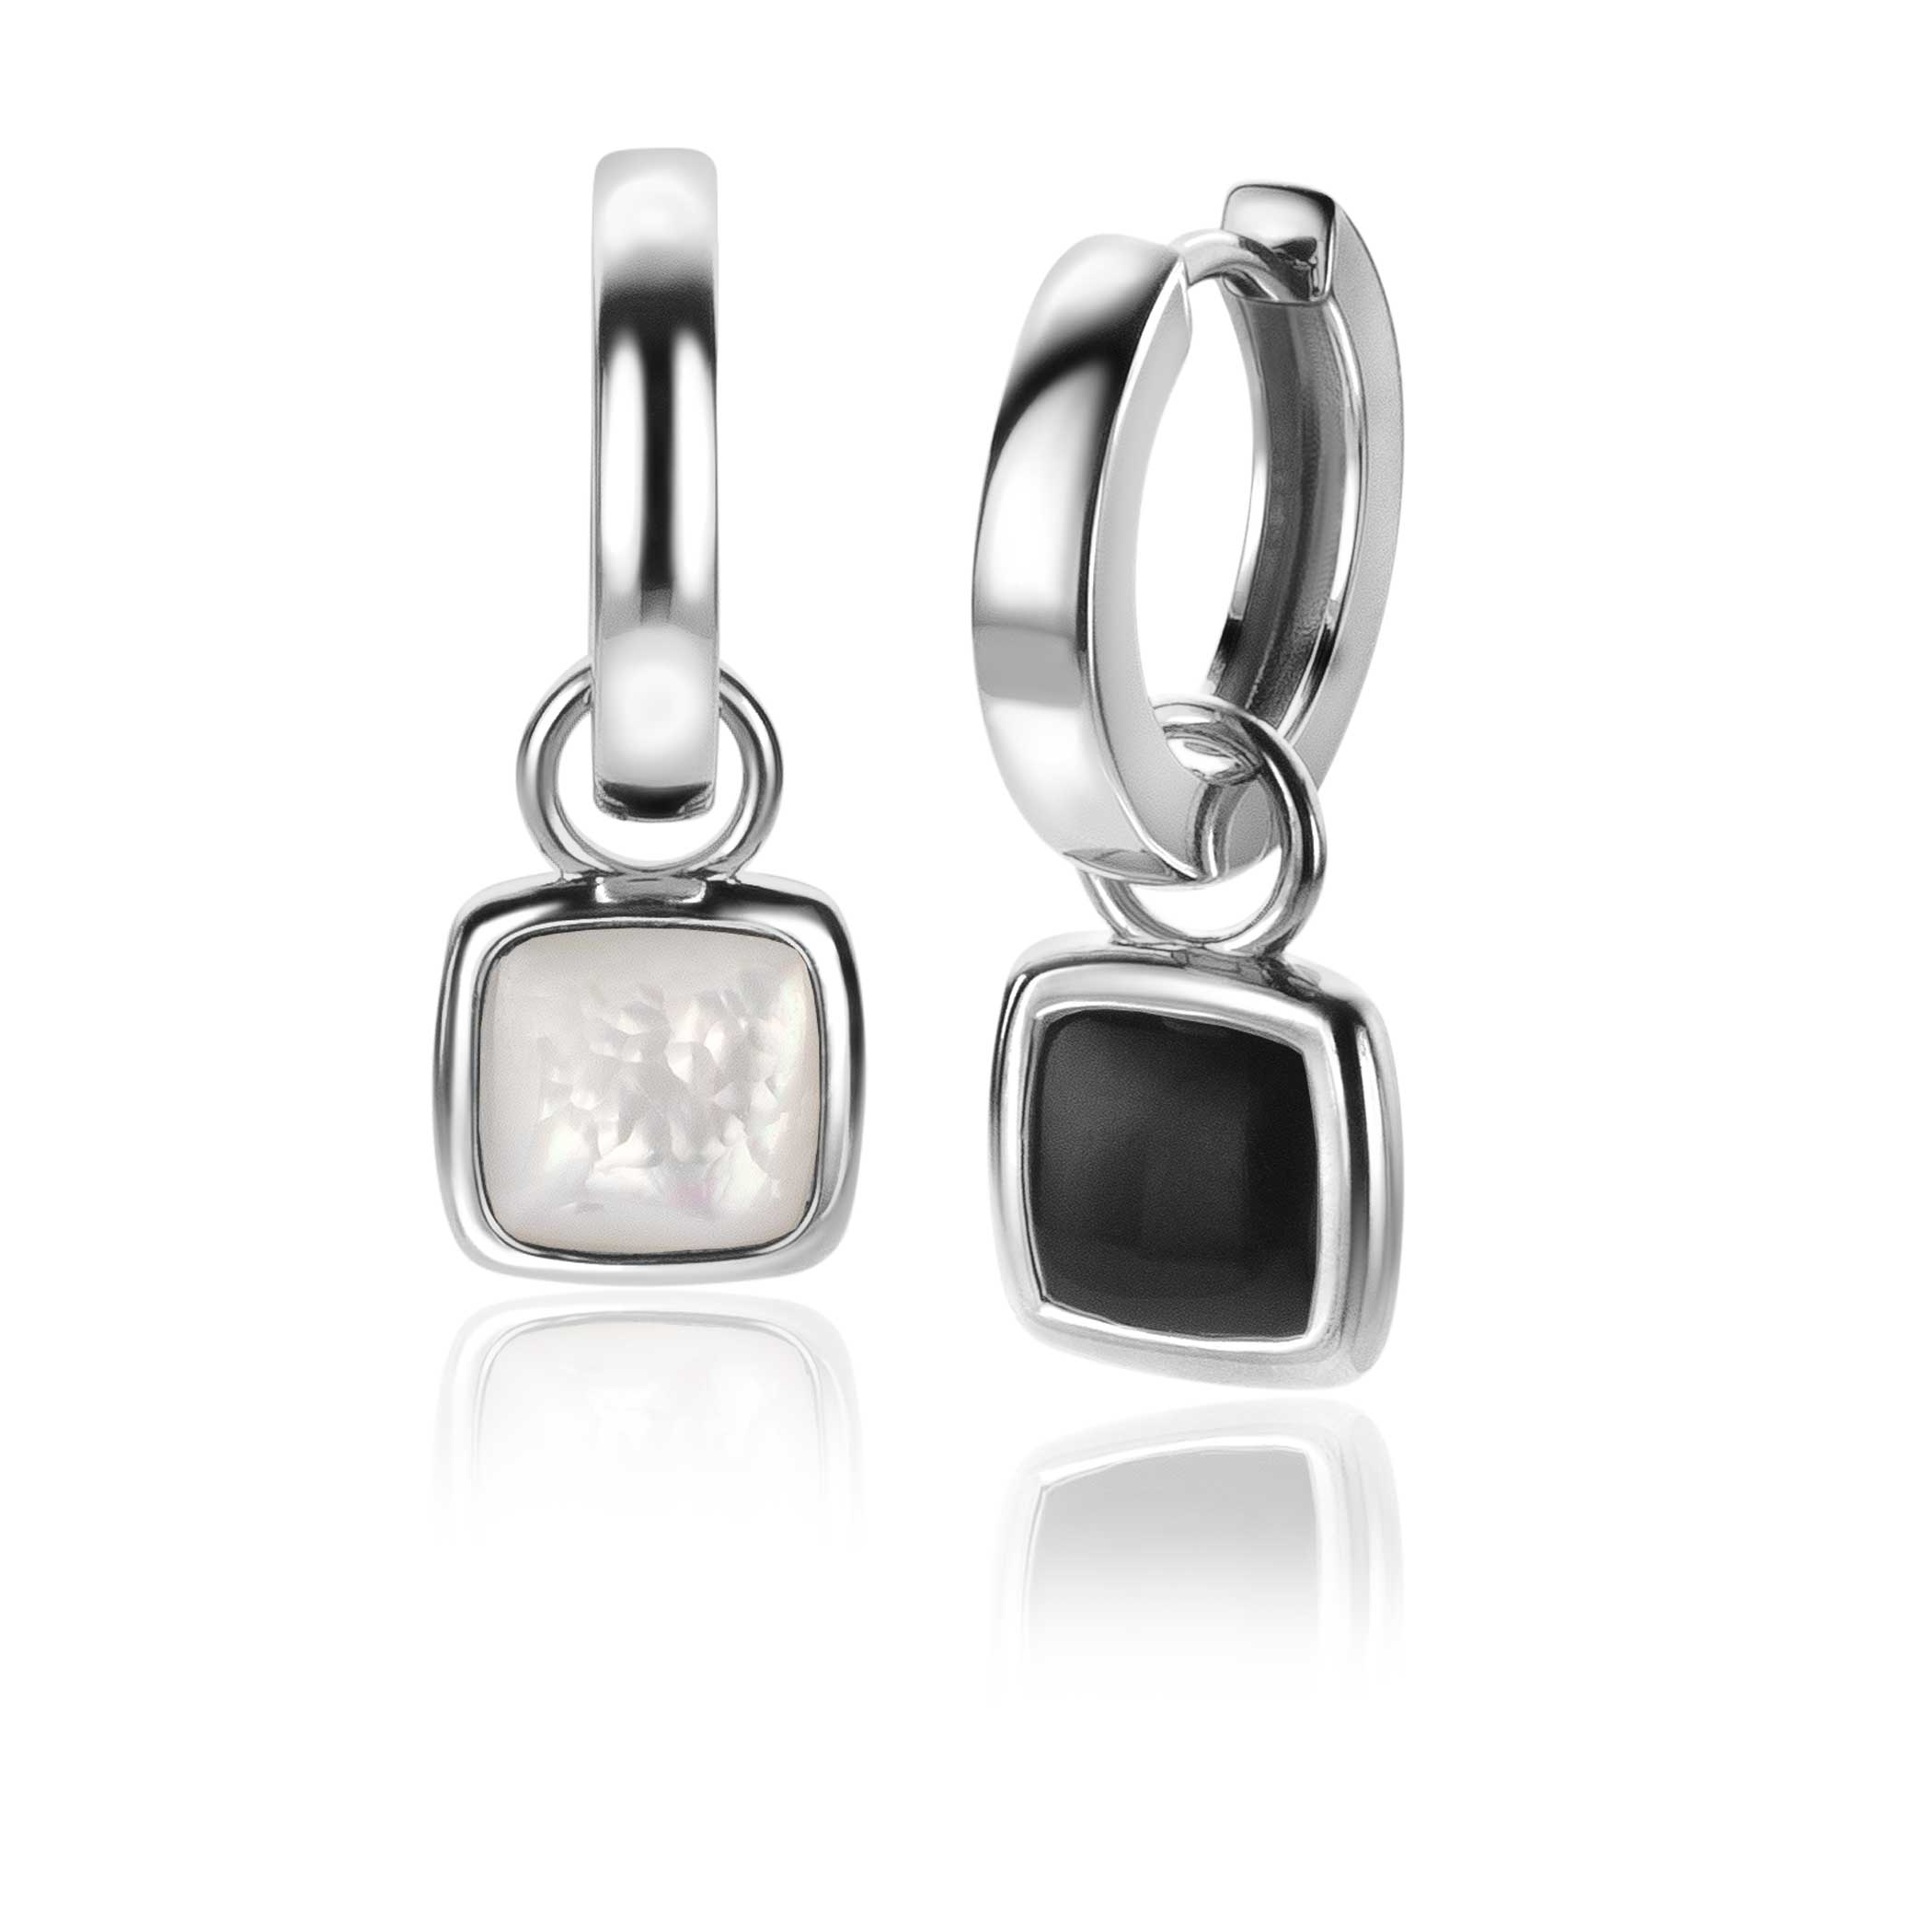 10mm ZINZI Sterling Silver Earrings Pendants Square Two-sided Black Onyx and White Mother-of-Pearl ZICH2257 (excl. hoop earrings)